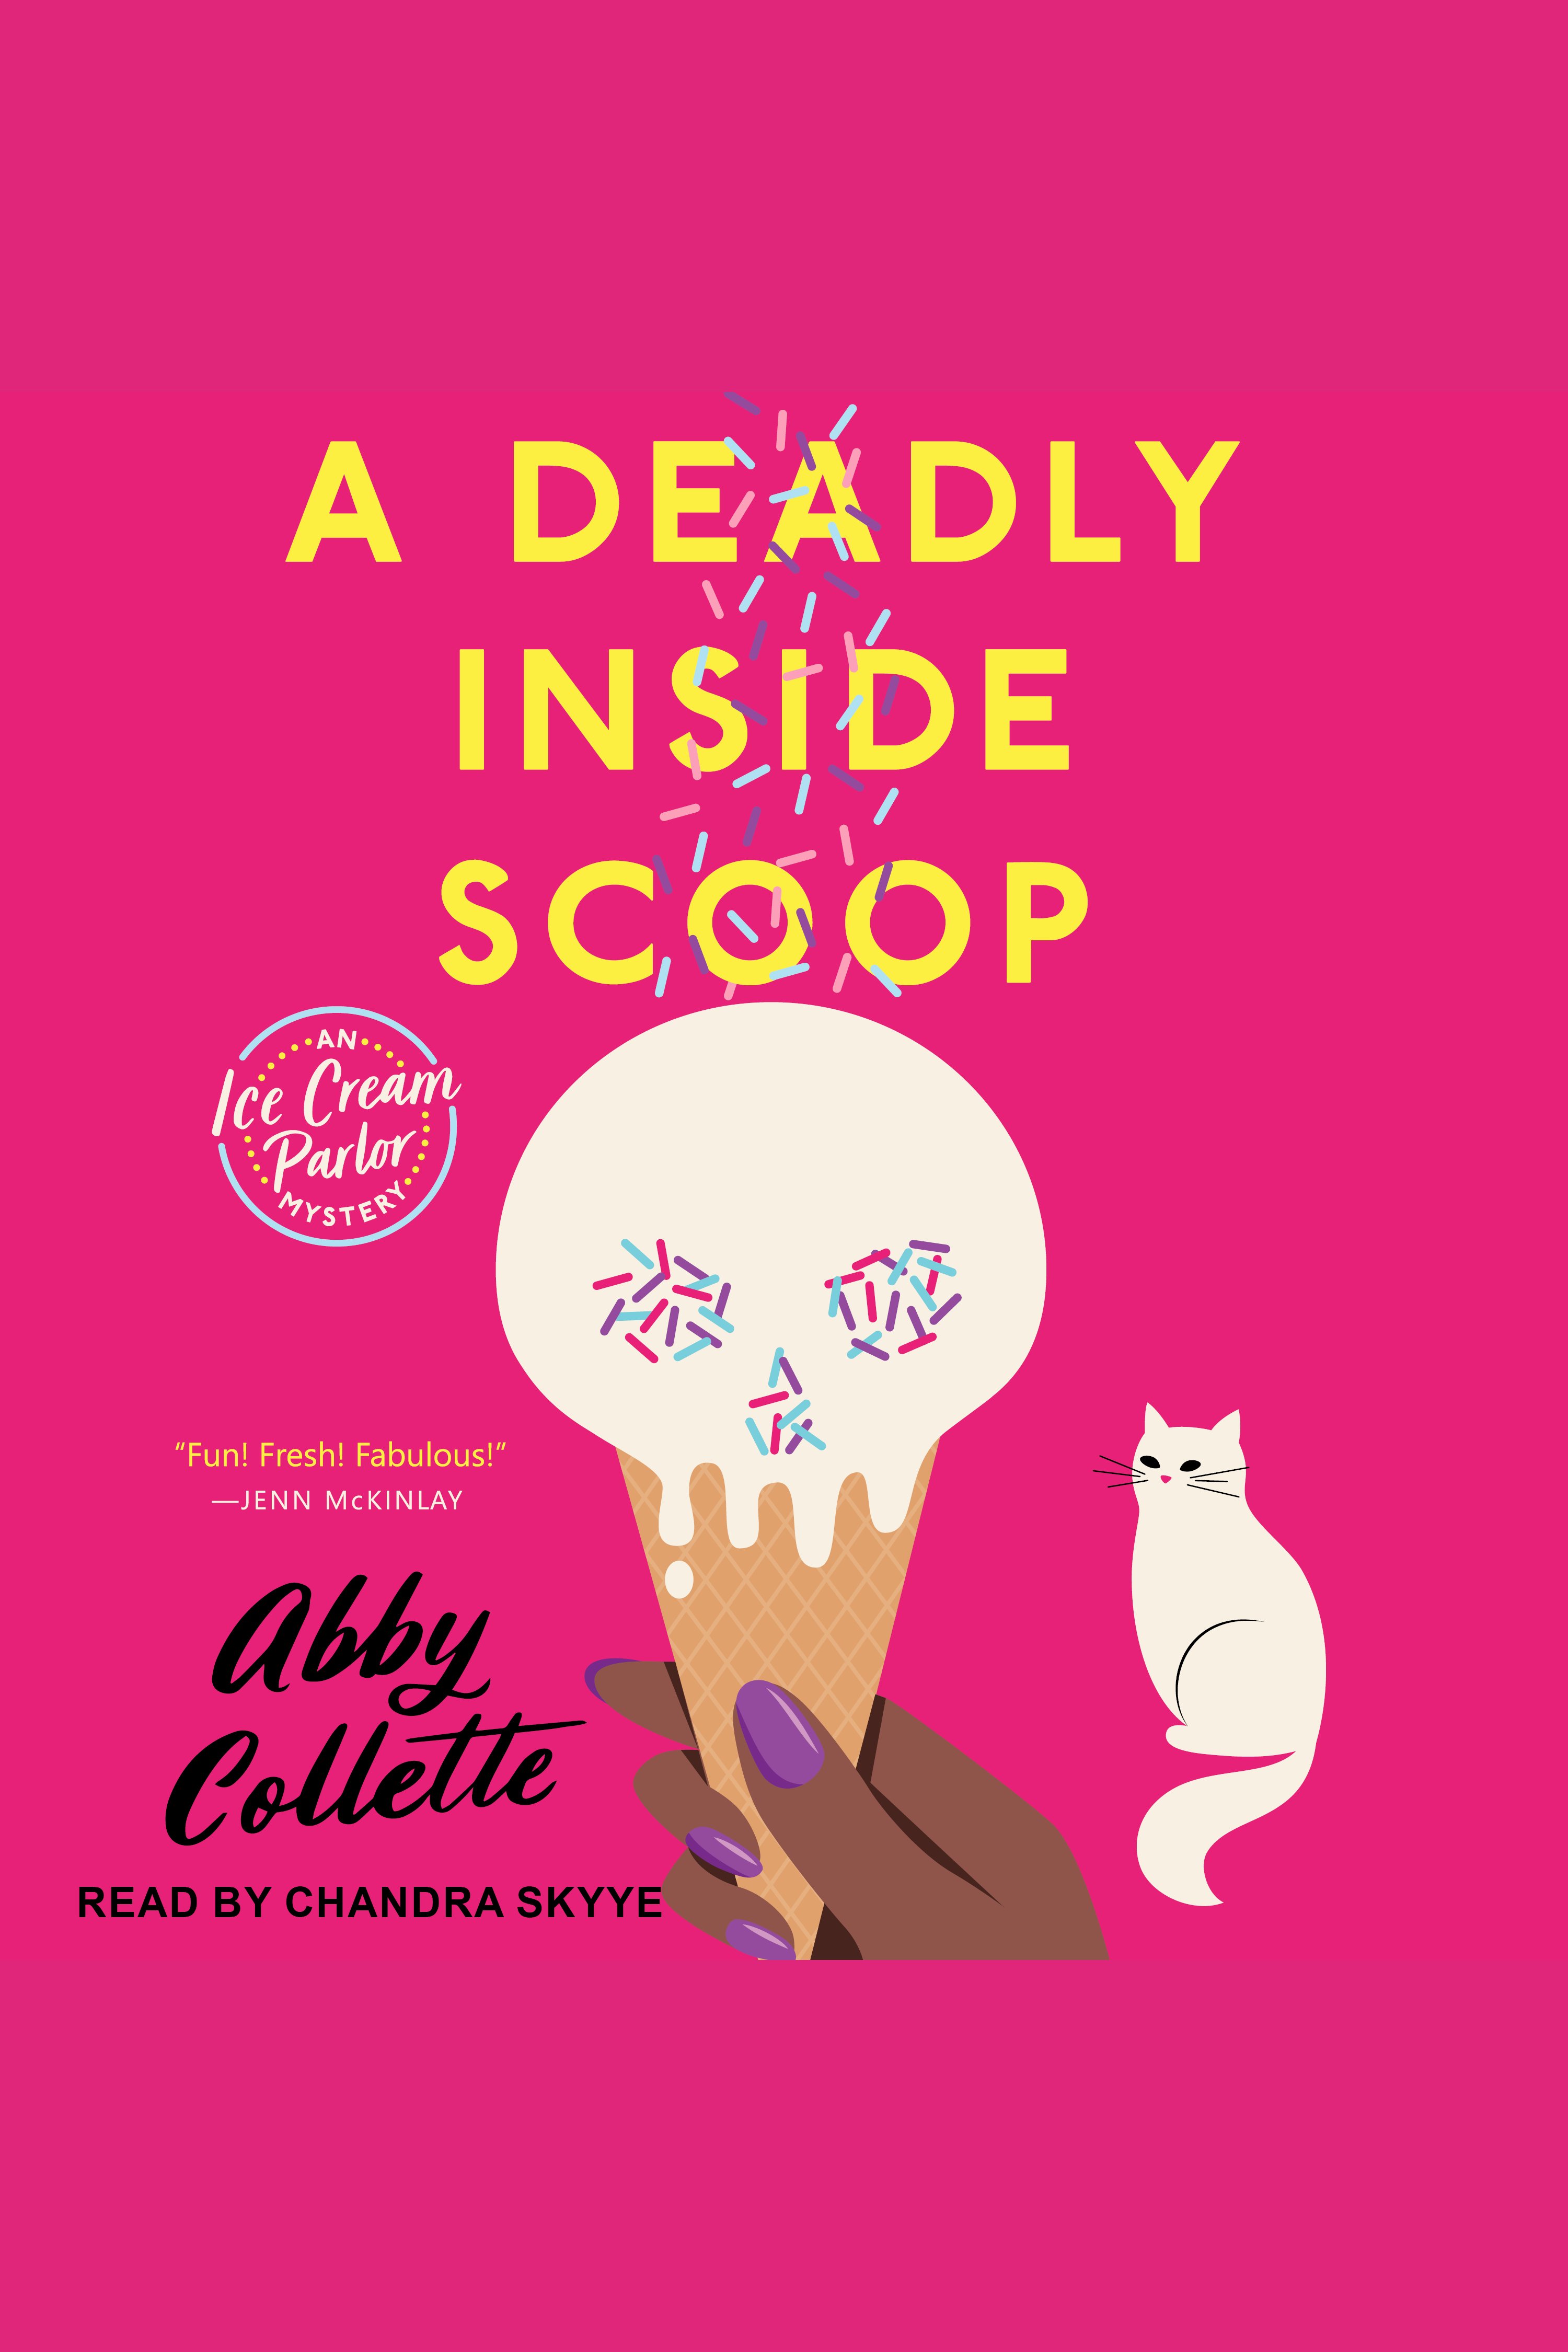 Umschlagbild für Deadly Inside Scoop, A [electronic resource] : An Ice Cream Shop Mystery